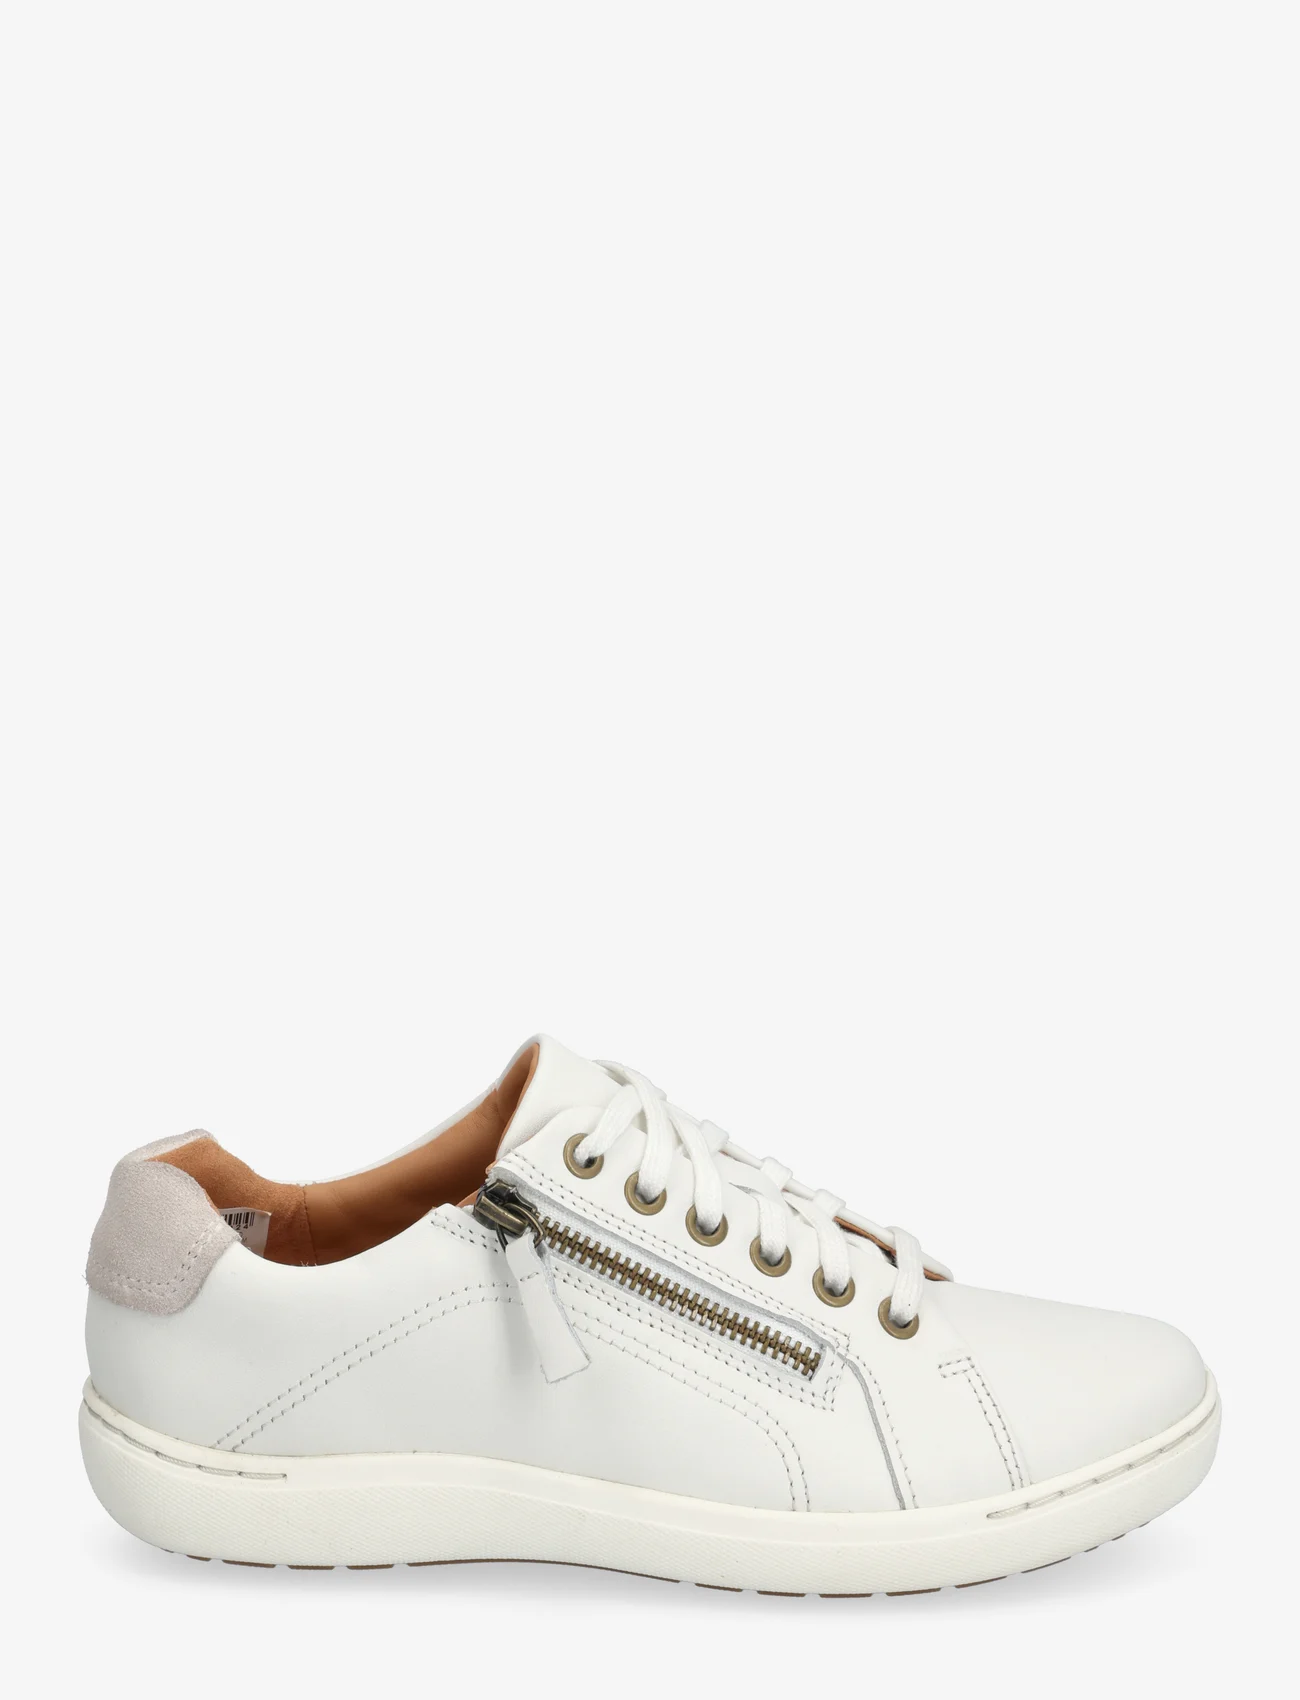 Clarks - Nalle Lace D - niedrige sneakers - 1255 white leather - 1